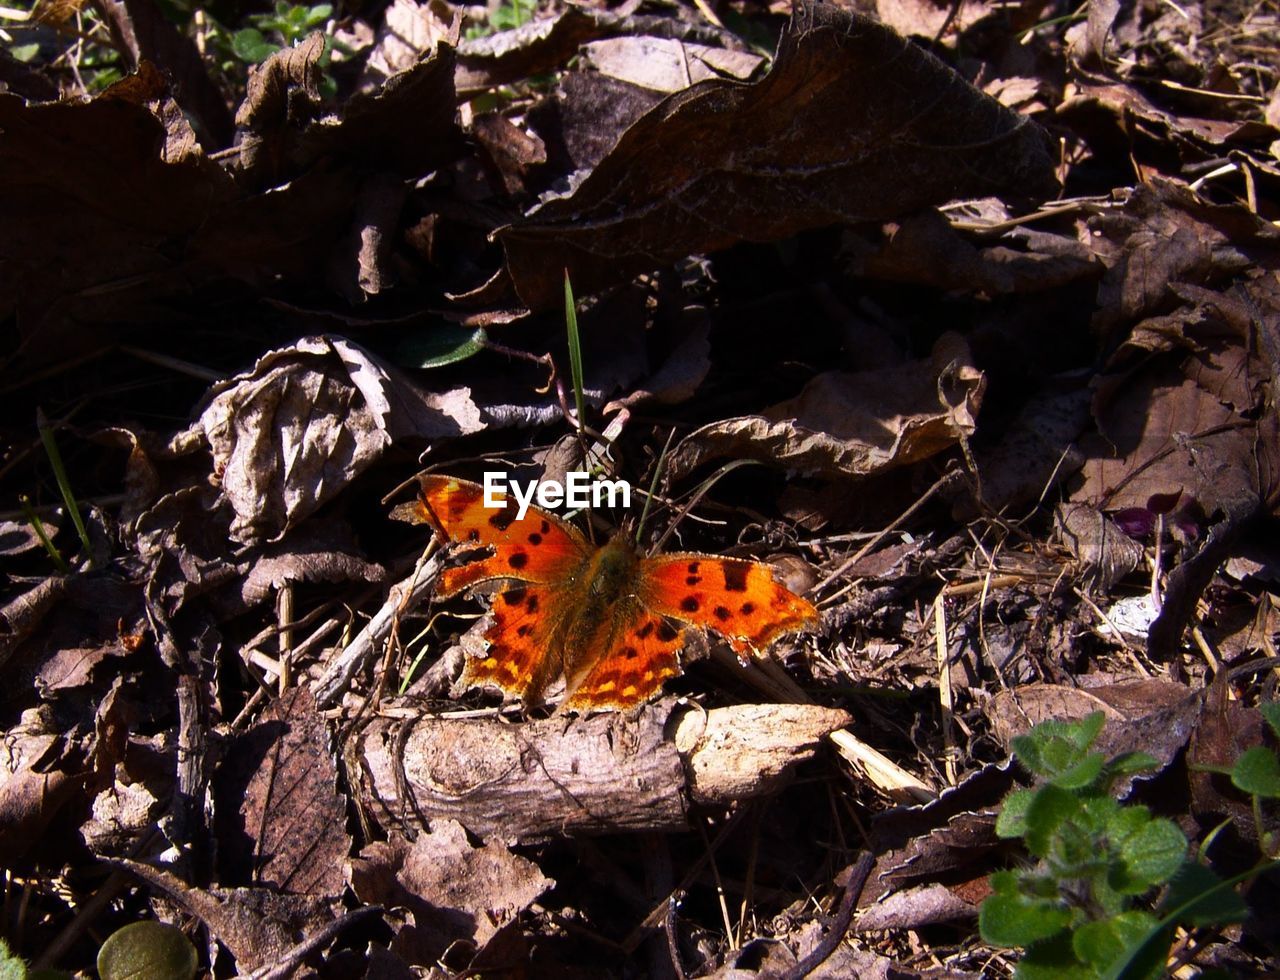 HIGH ANGLE VIEW OF ORANGE BUTTERFLY ON DRY PLANTS